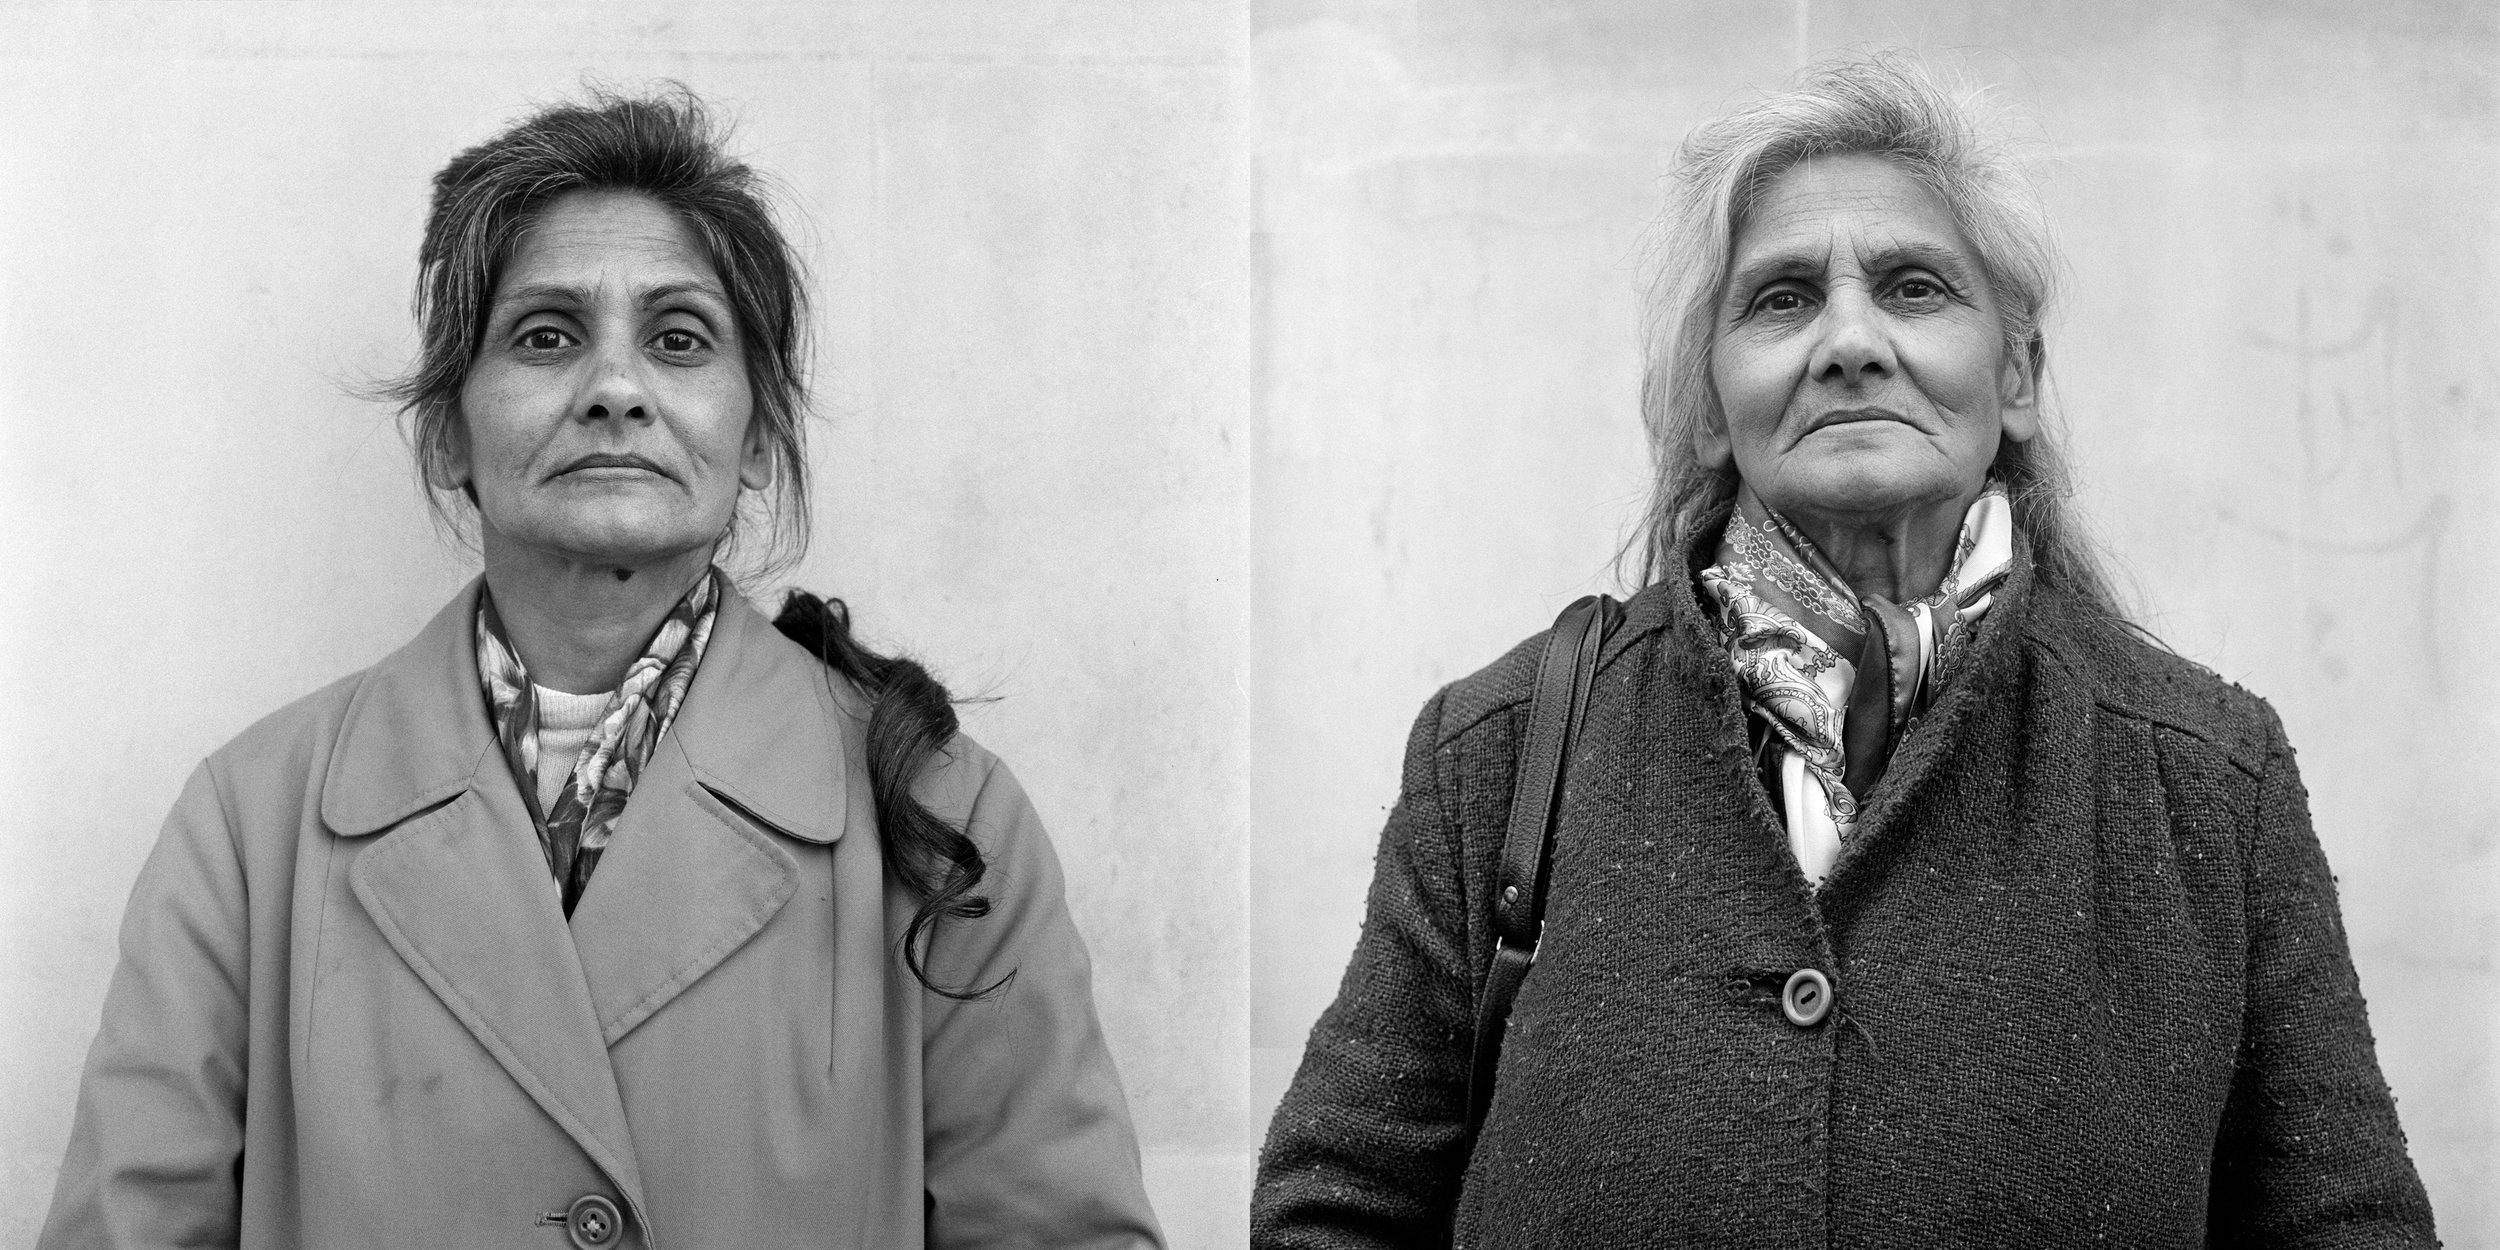  Now and Then portrait from the   Free Photographic Omnibus  , Florence Alma Snoad, Southampton. 1974 and 1999 ©Daniel Meadows   